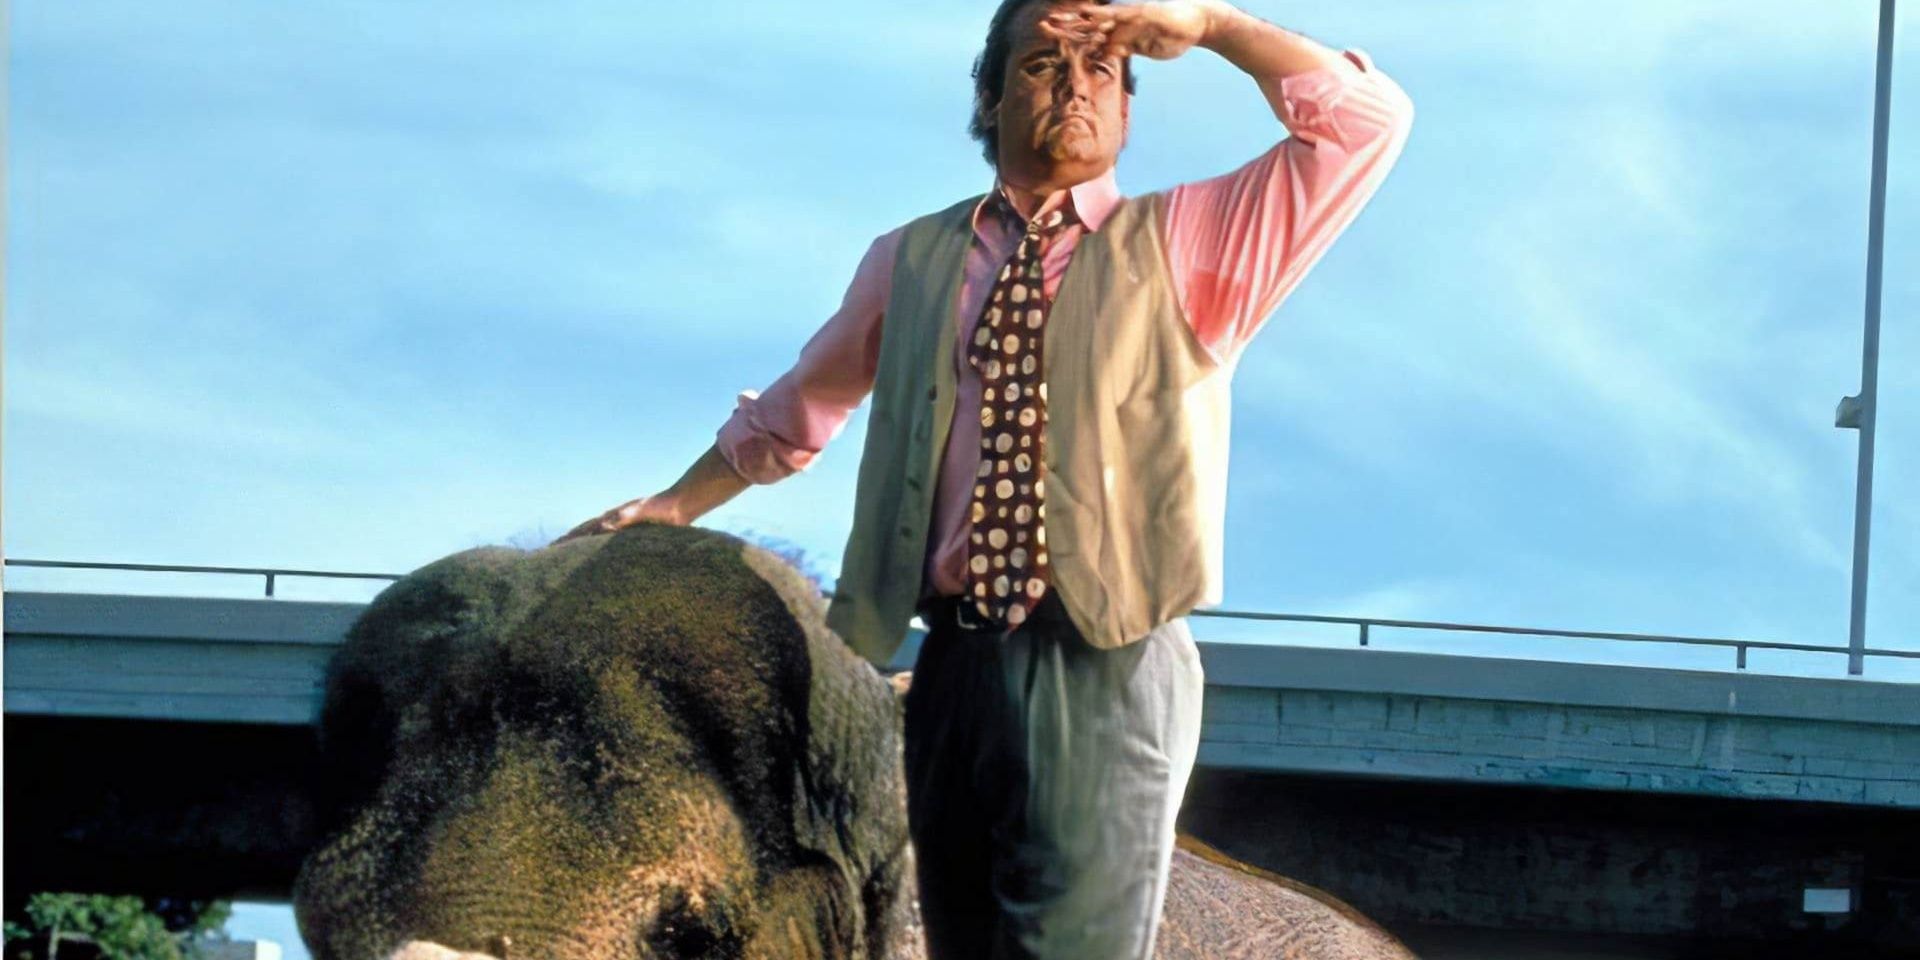 Bill Murray standing next to elephant in Larger Than Life